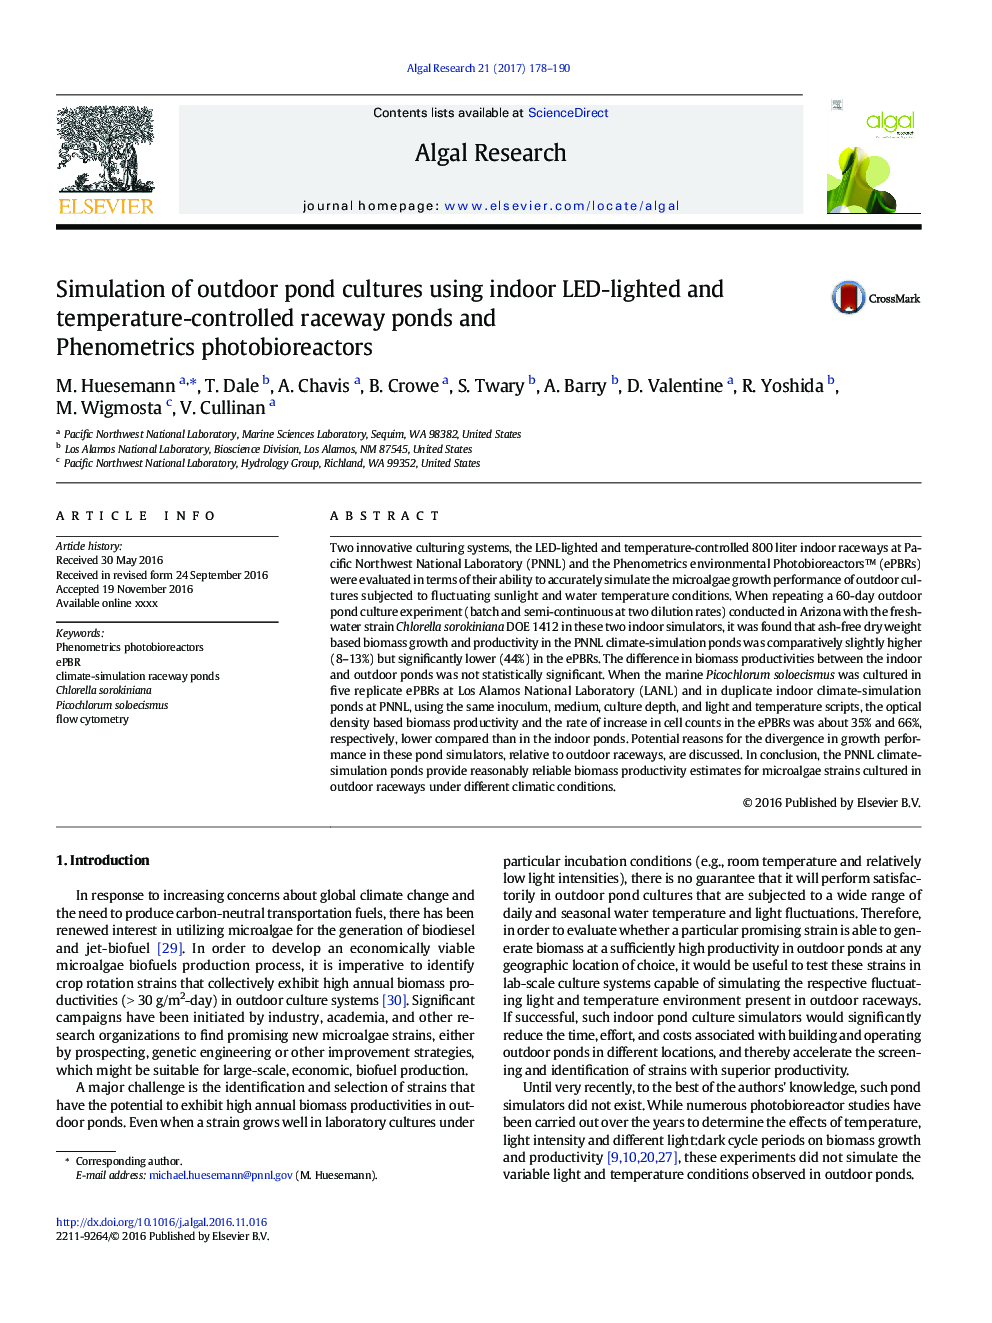 Simulation of outdoor pond cultures using indoor LED-lighted and temperature-controlled raceway ponds and Phenometrics photobioreactors